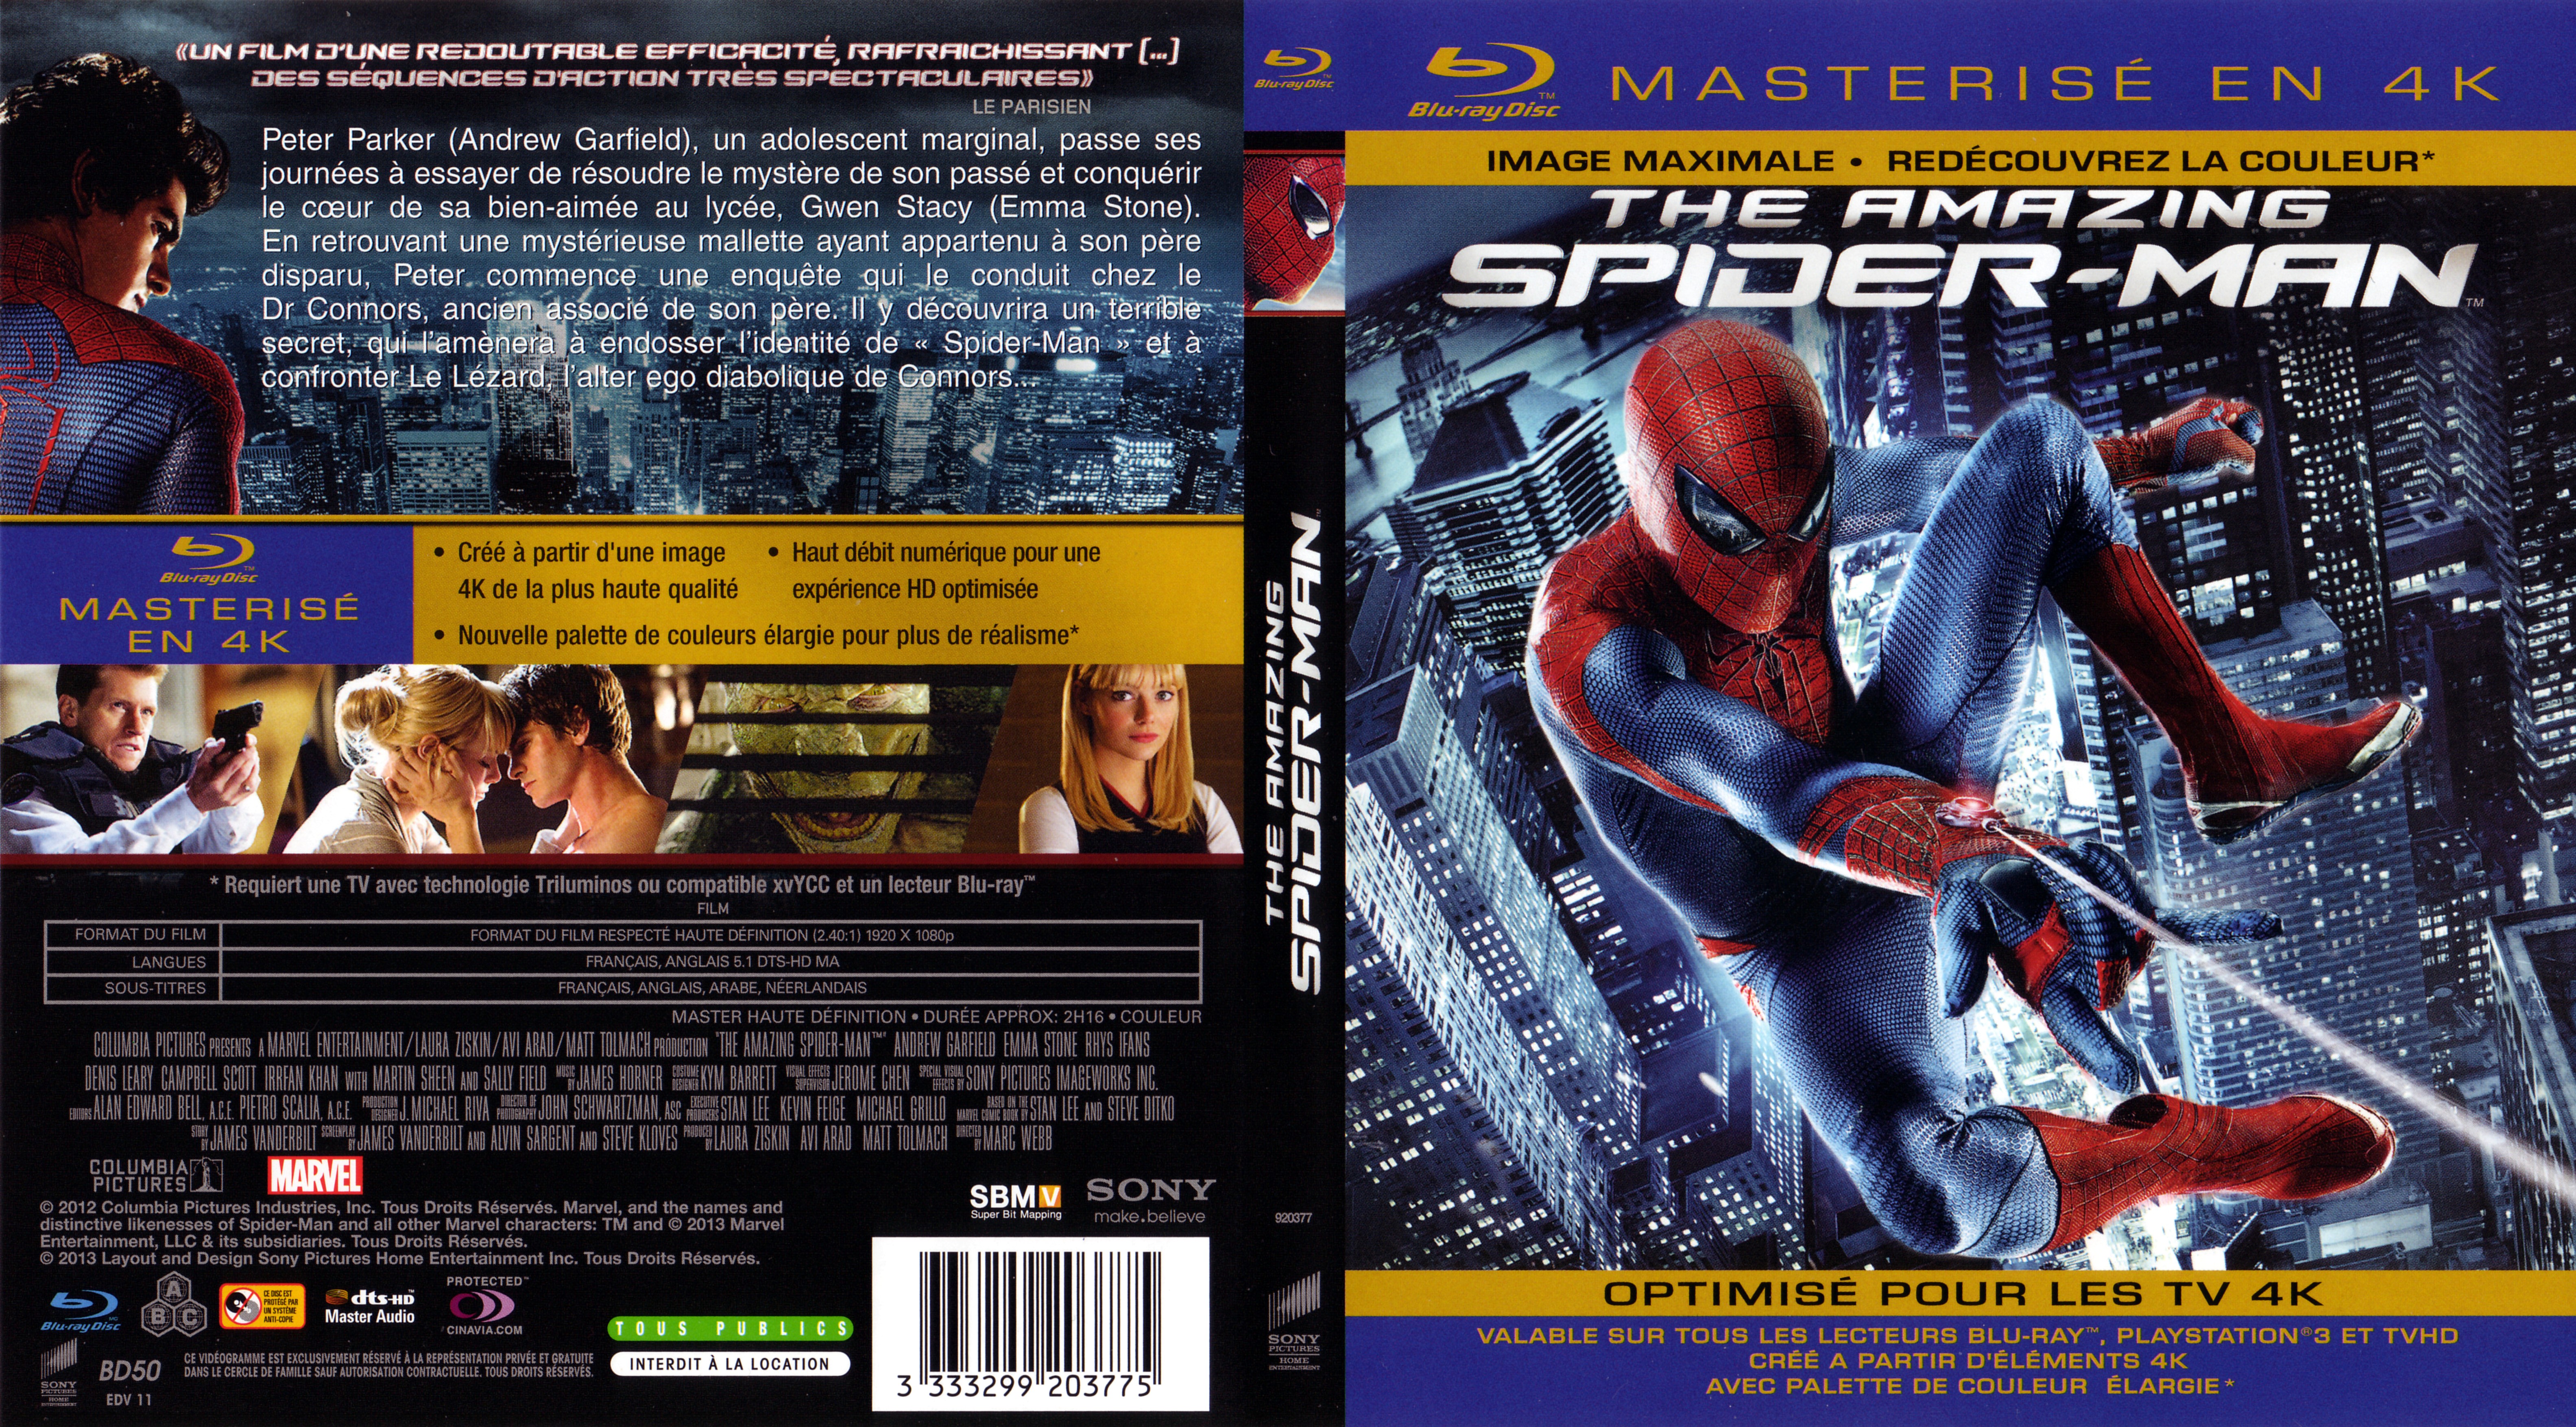 Jaquette DVD The amazing spider-man 4K (BLU-RAY)